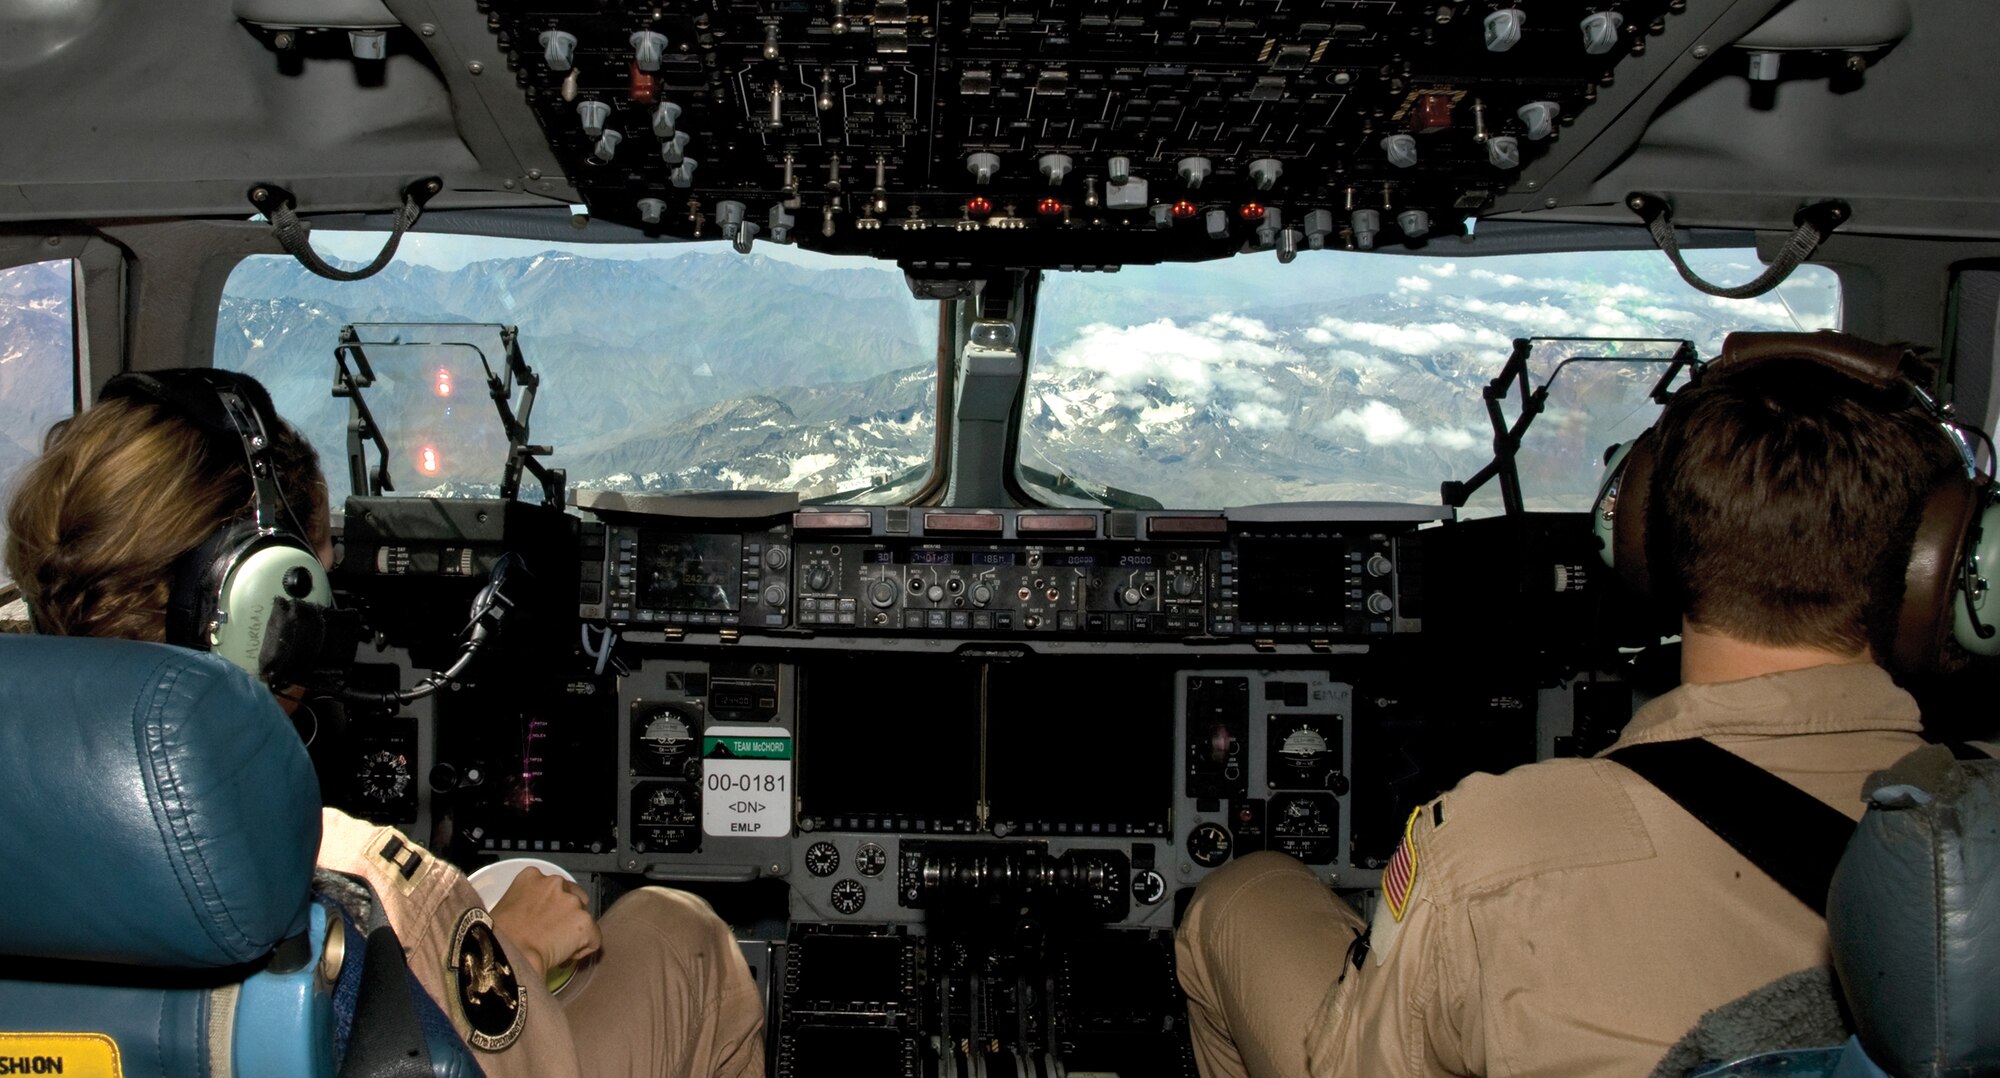 Capt Katrina Morgan, left, and 1Lt Jordan Bronson, right, 817th Expeditionary AS Detachment 1 pilots, conduct system management during flight with the help of autopilot. Autopilot helps reduce pilot fatigue during deployed missions that may last up to 16 hours. Capt Morgan and 1Lt Bronson are deployed out of Joint Base Lewis-McChord, Wash.